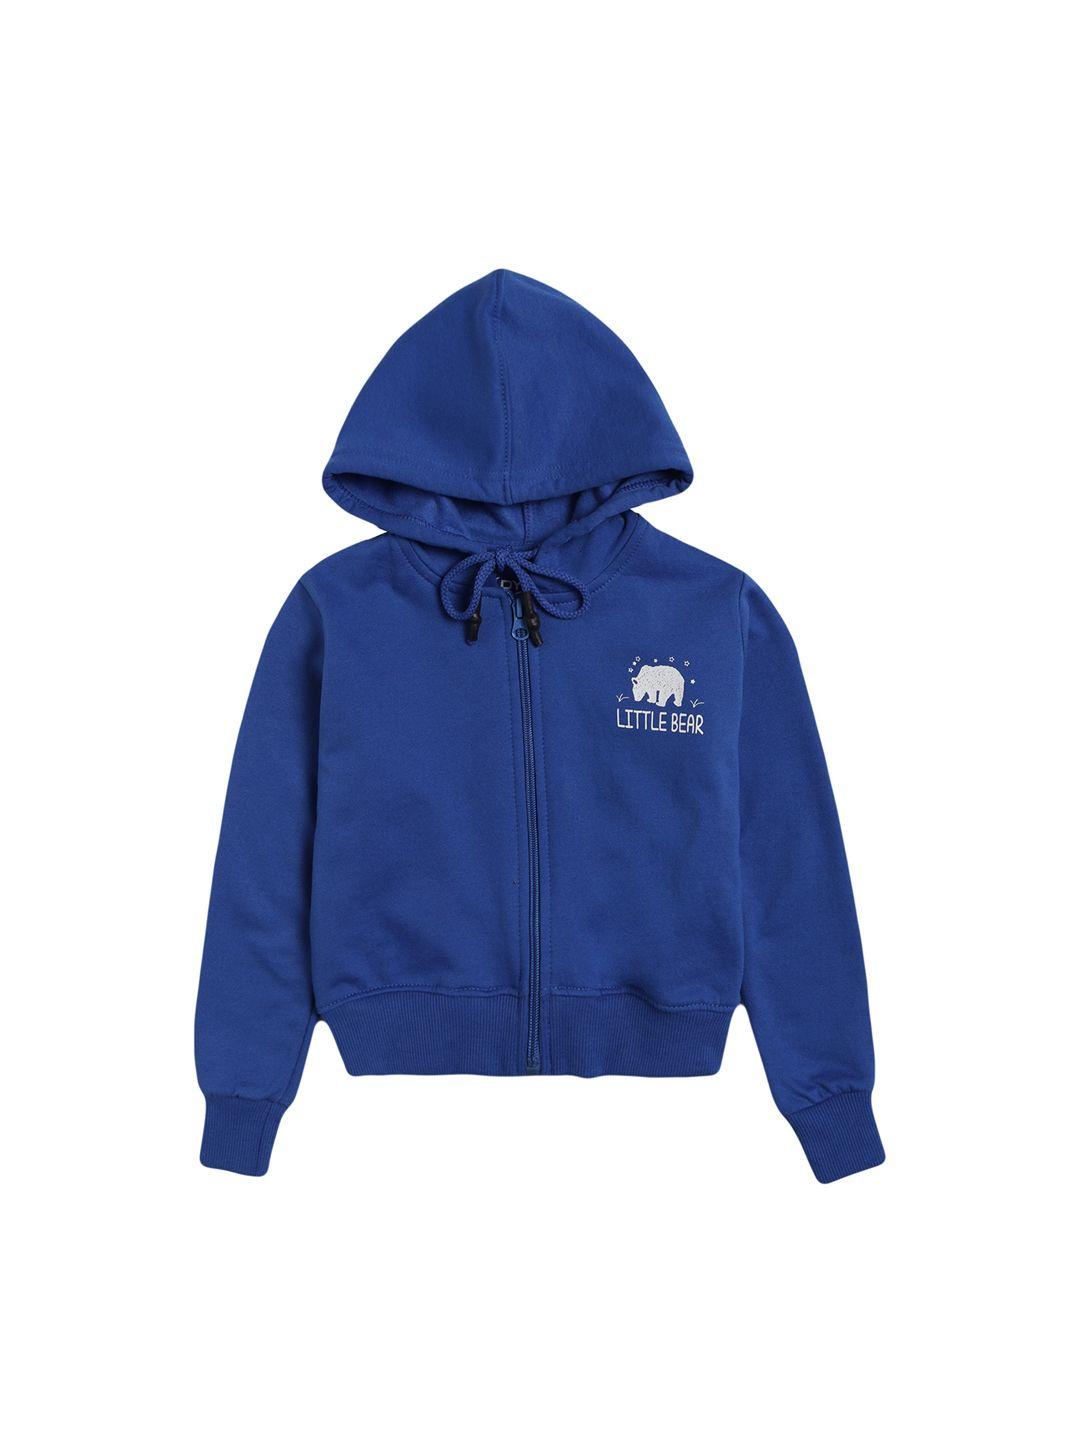 dyca boys blue fleece lightweight crop open front jacket with embroidered